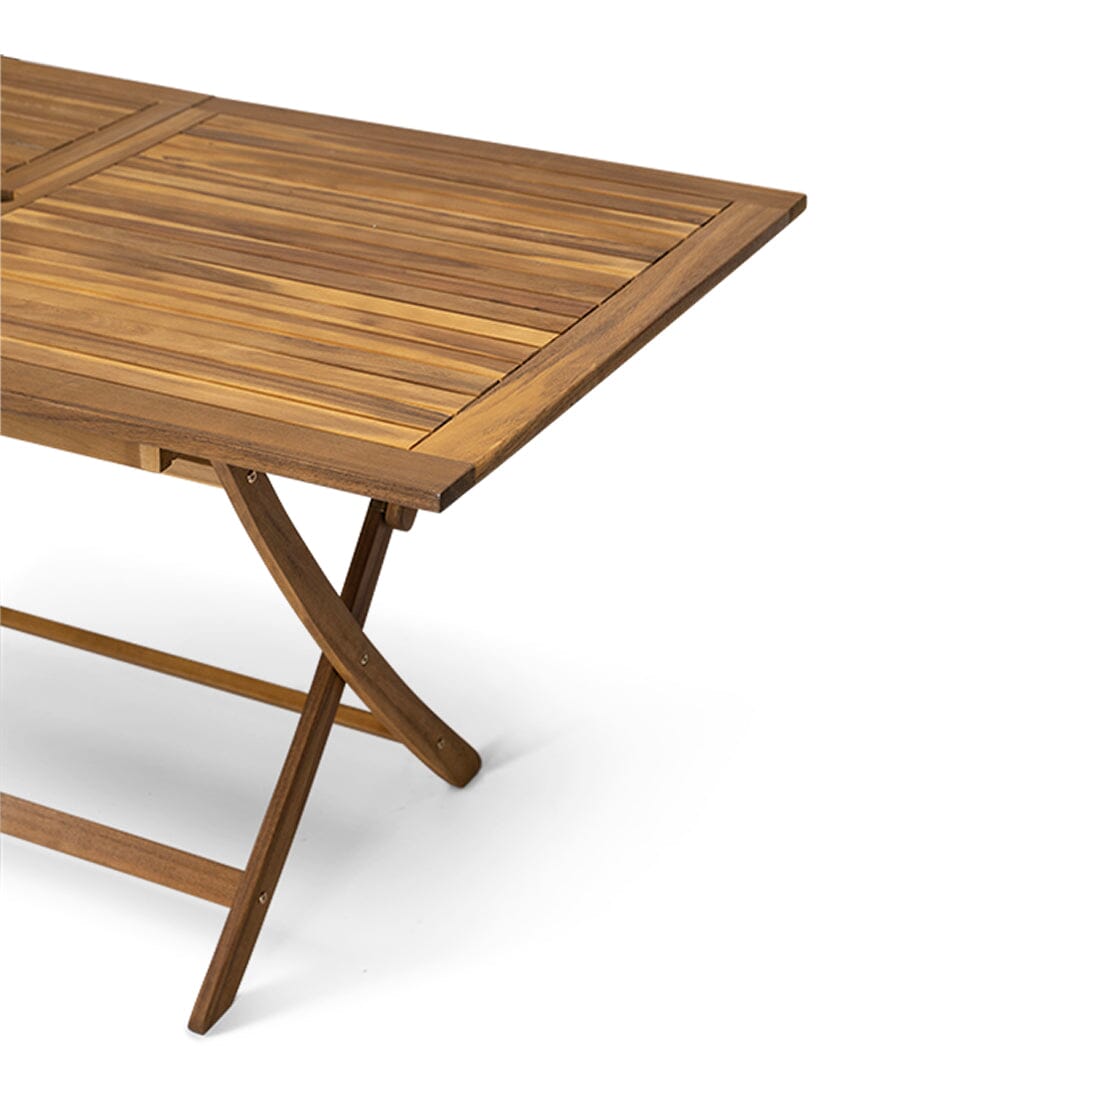 Ashby Solid Wood Folding Table